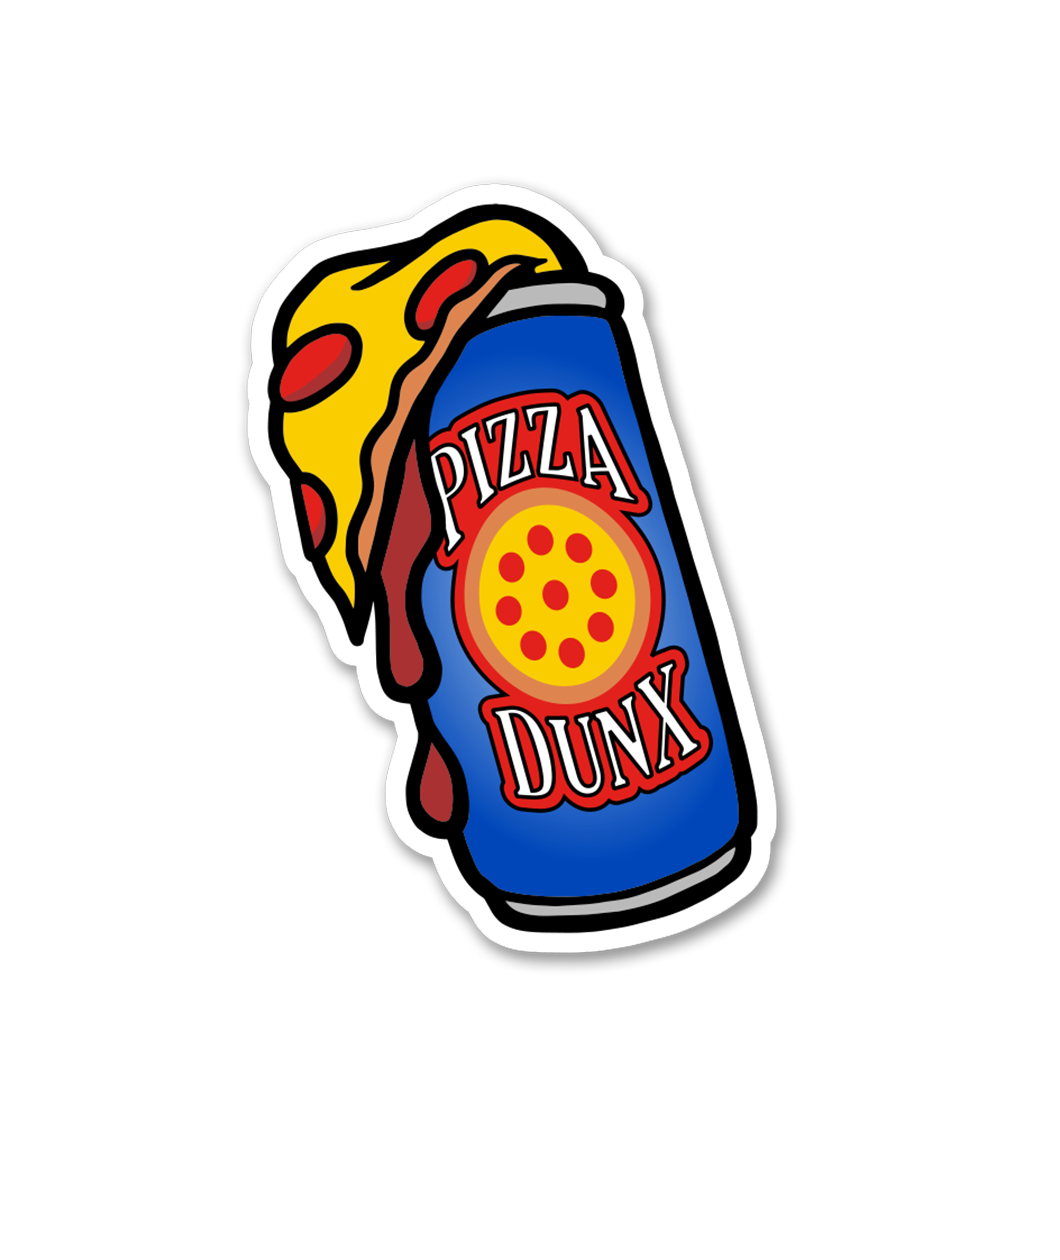 Sticker of a blue can that has a logo of a pizza with the words, "PIZZA DUNX" and a slice of pepperoni pizza coming out of the top.